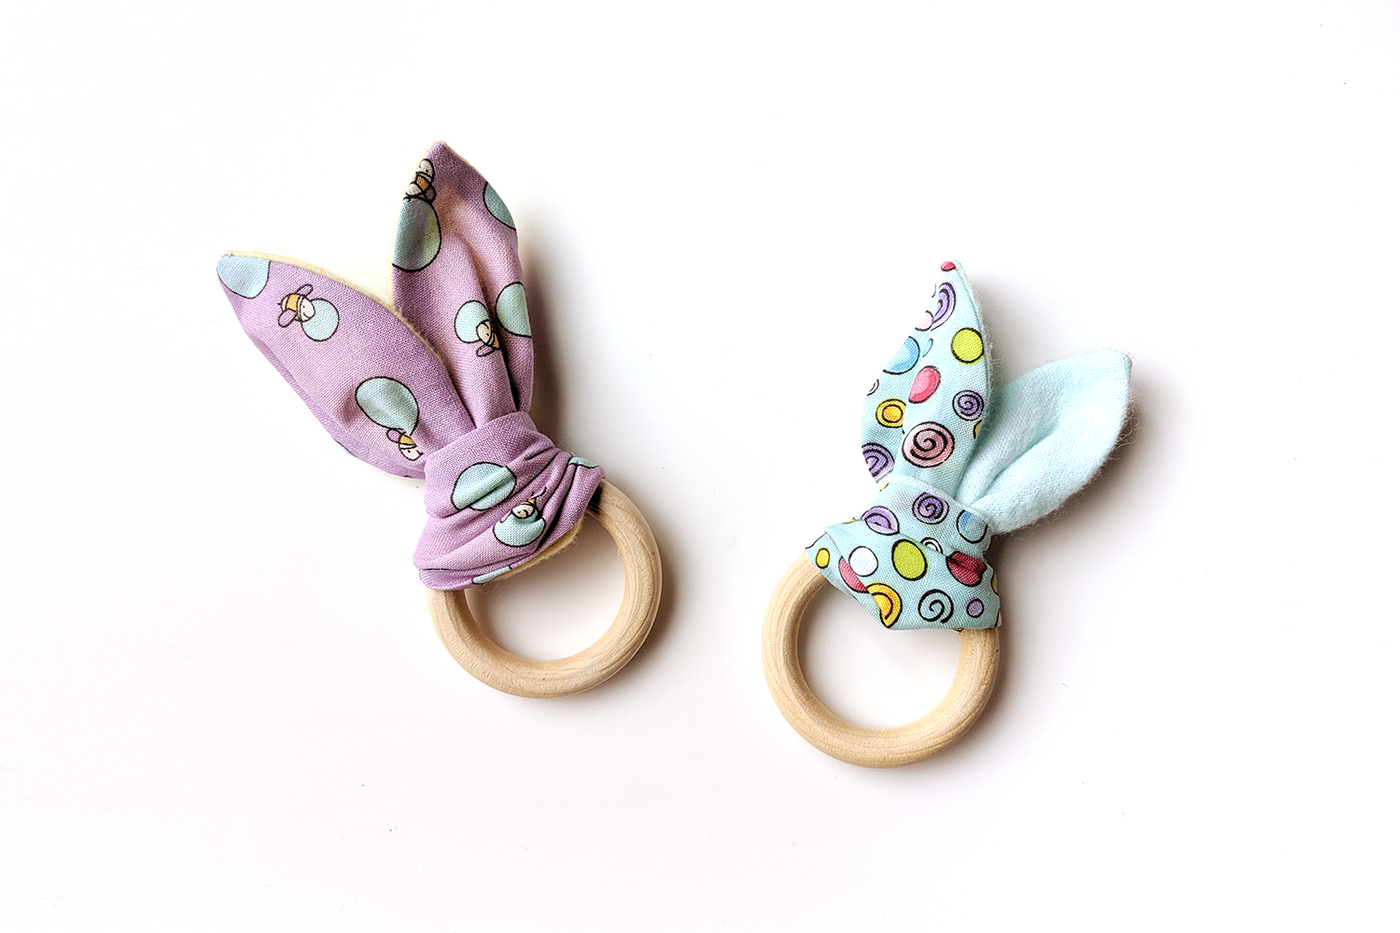 Two wooden rings, each with fabric on them to make a bunny ear style teether.